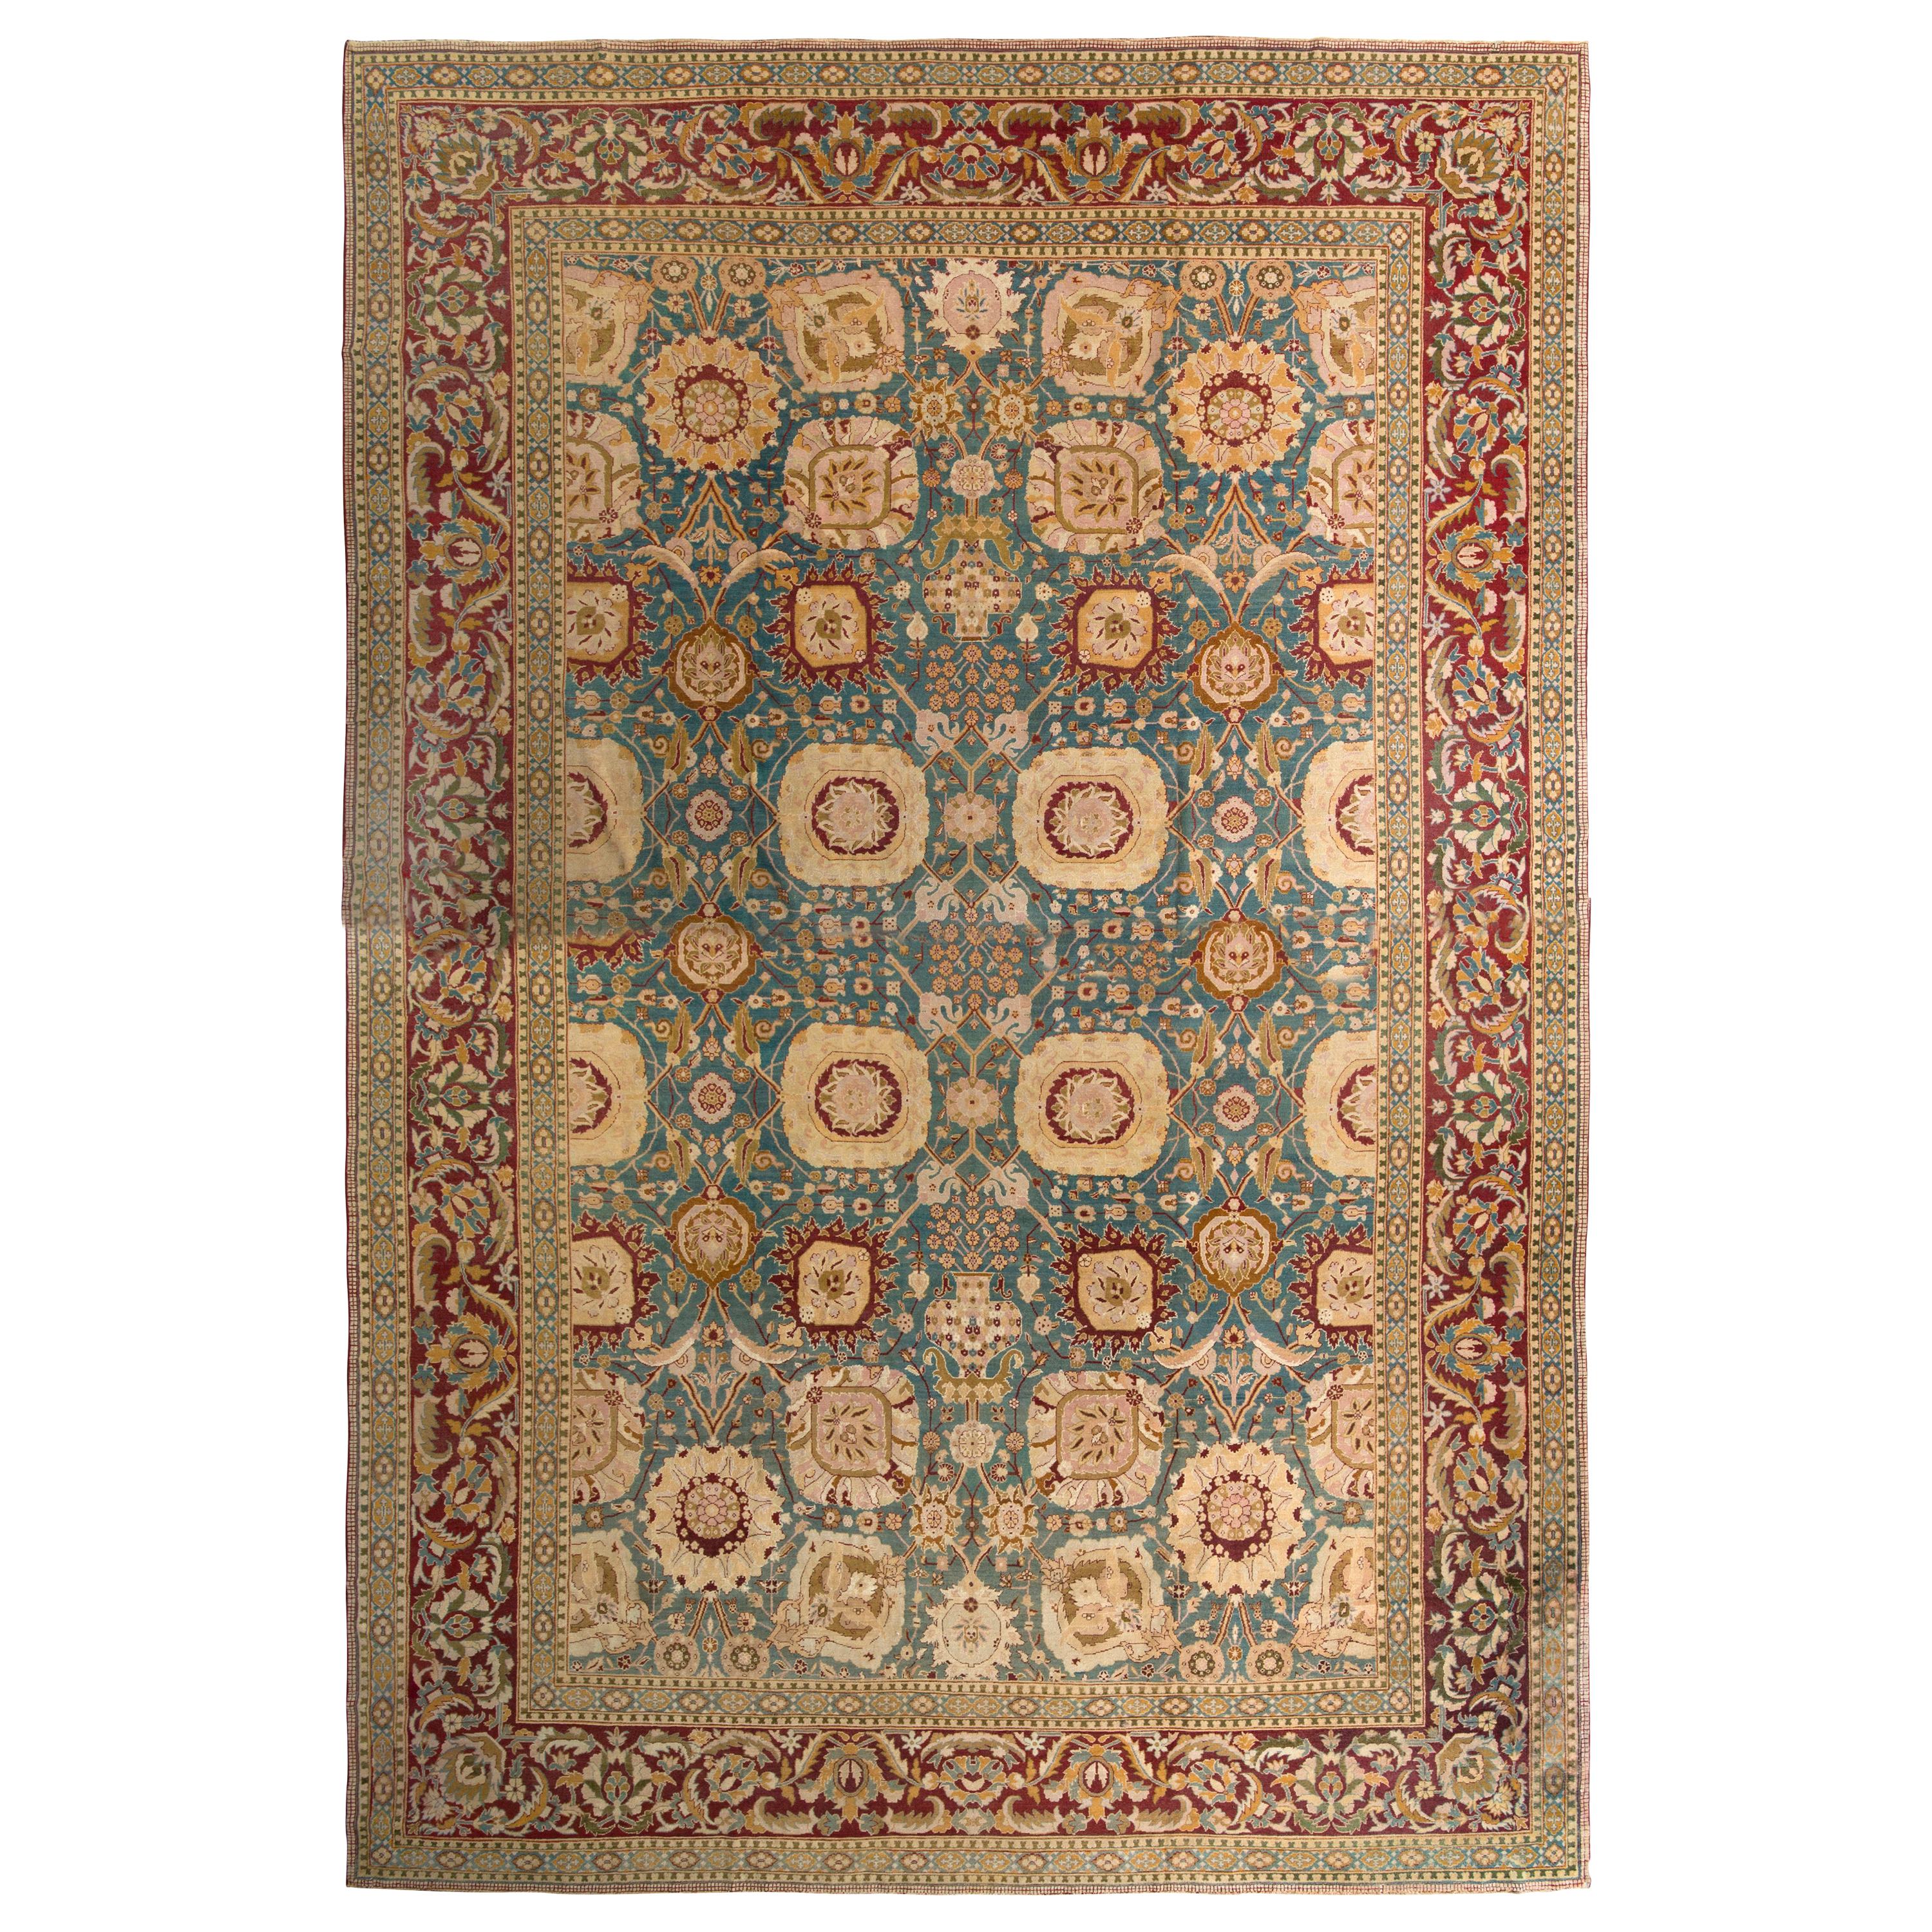 Antique Amritsar Rug in Blue with Gold & Red Floral Patterns, from Rug & Kilim For Sale